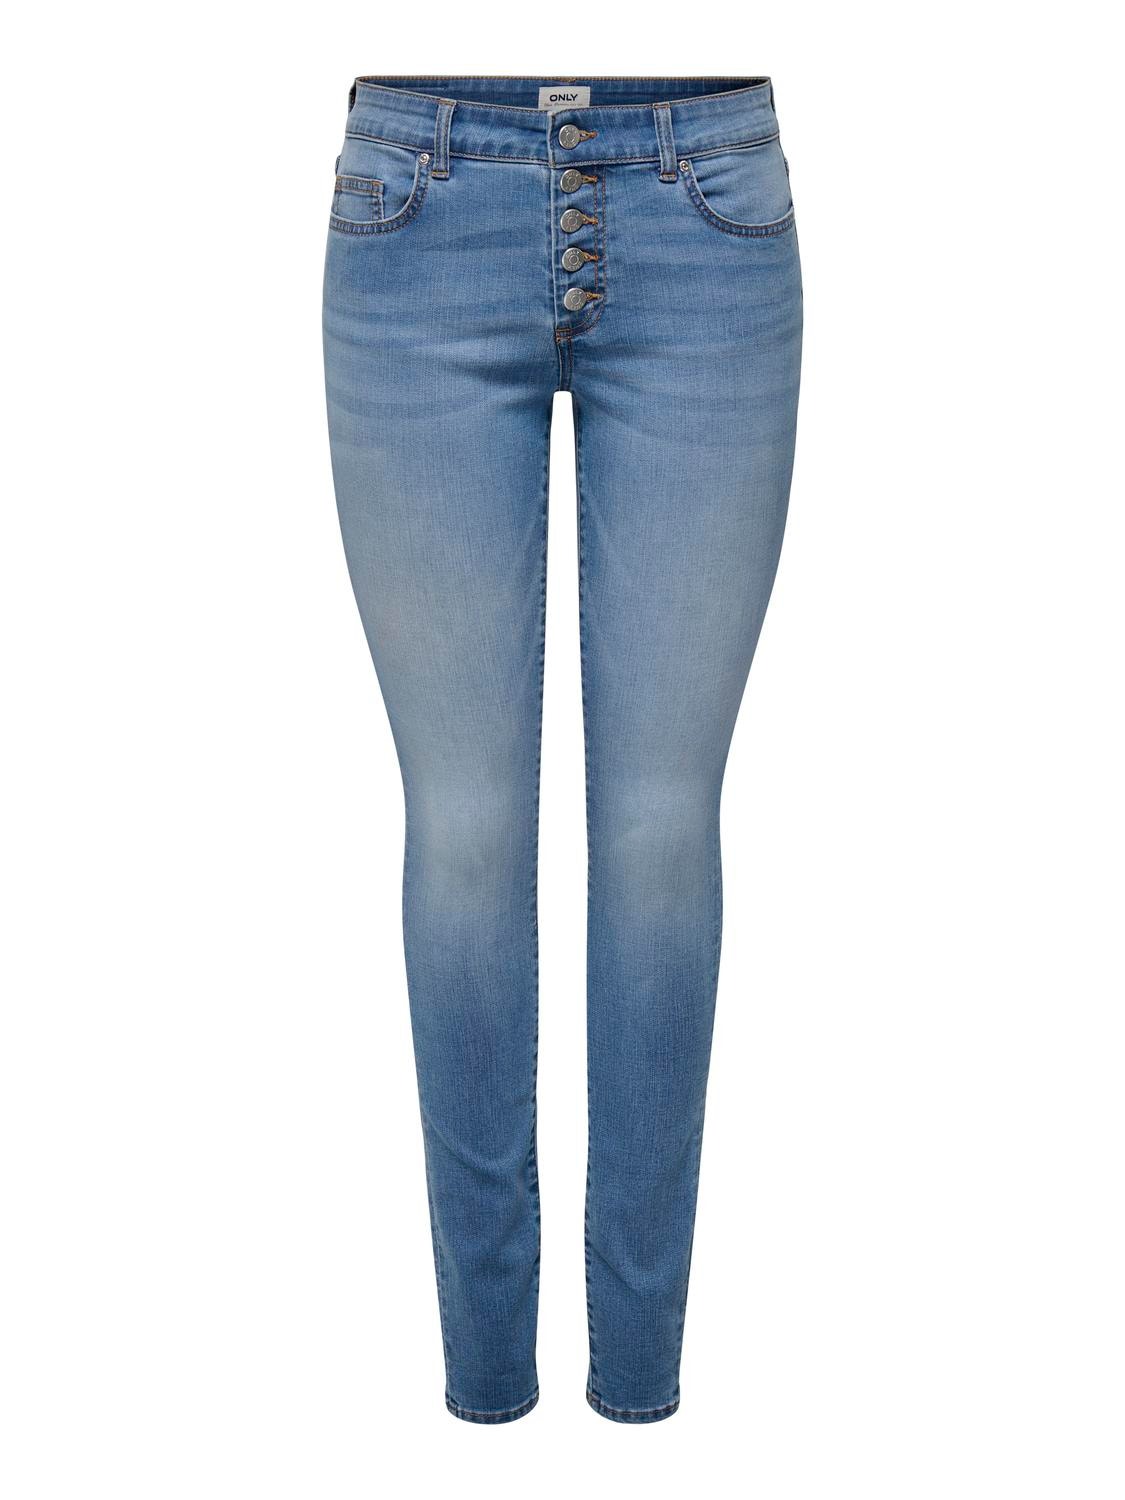 ONLY Jeans Skinny Fit Taille moyenne -Light Blue Denim - 15332914